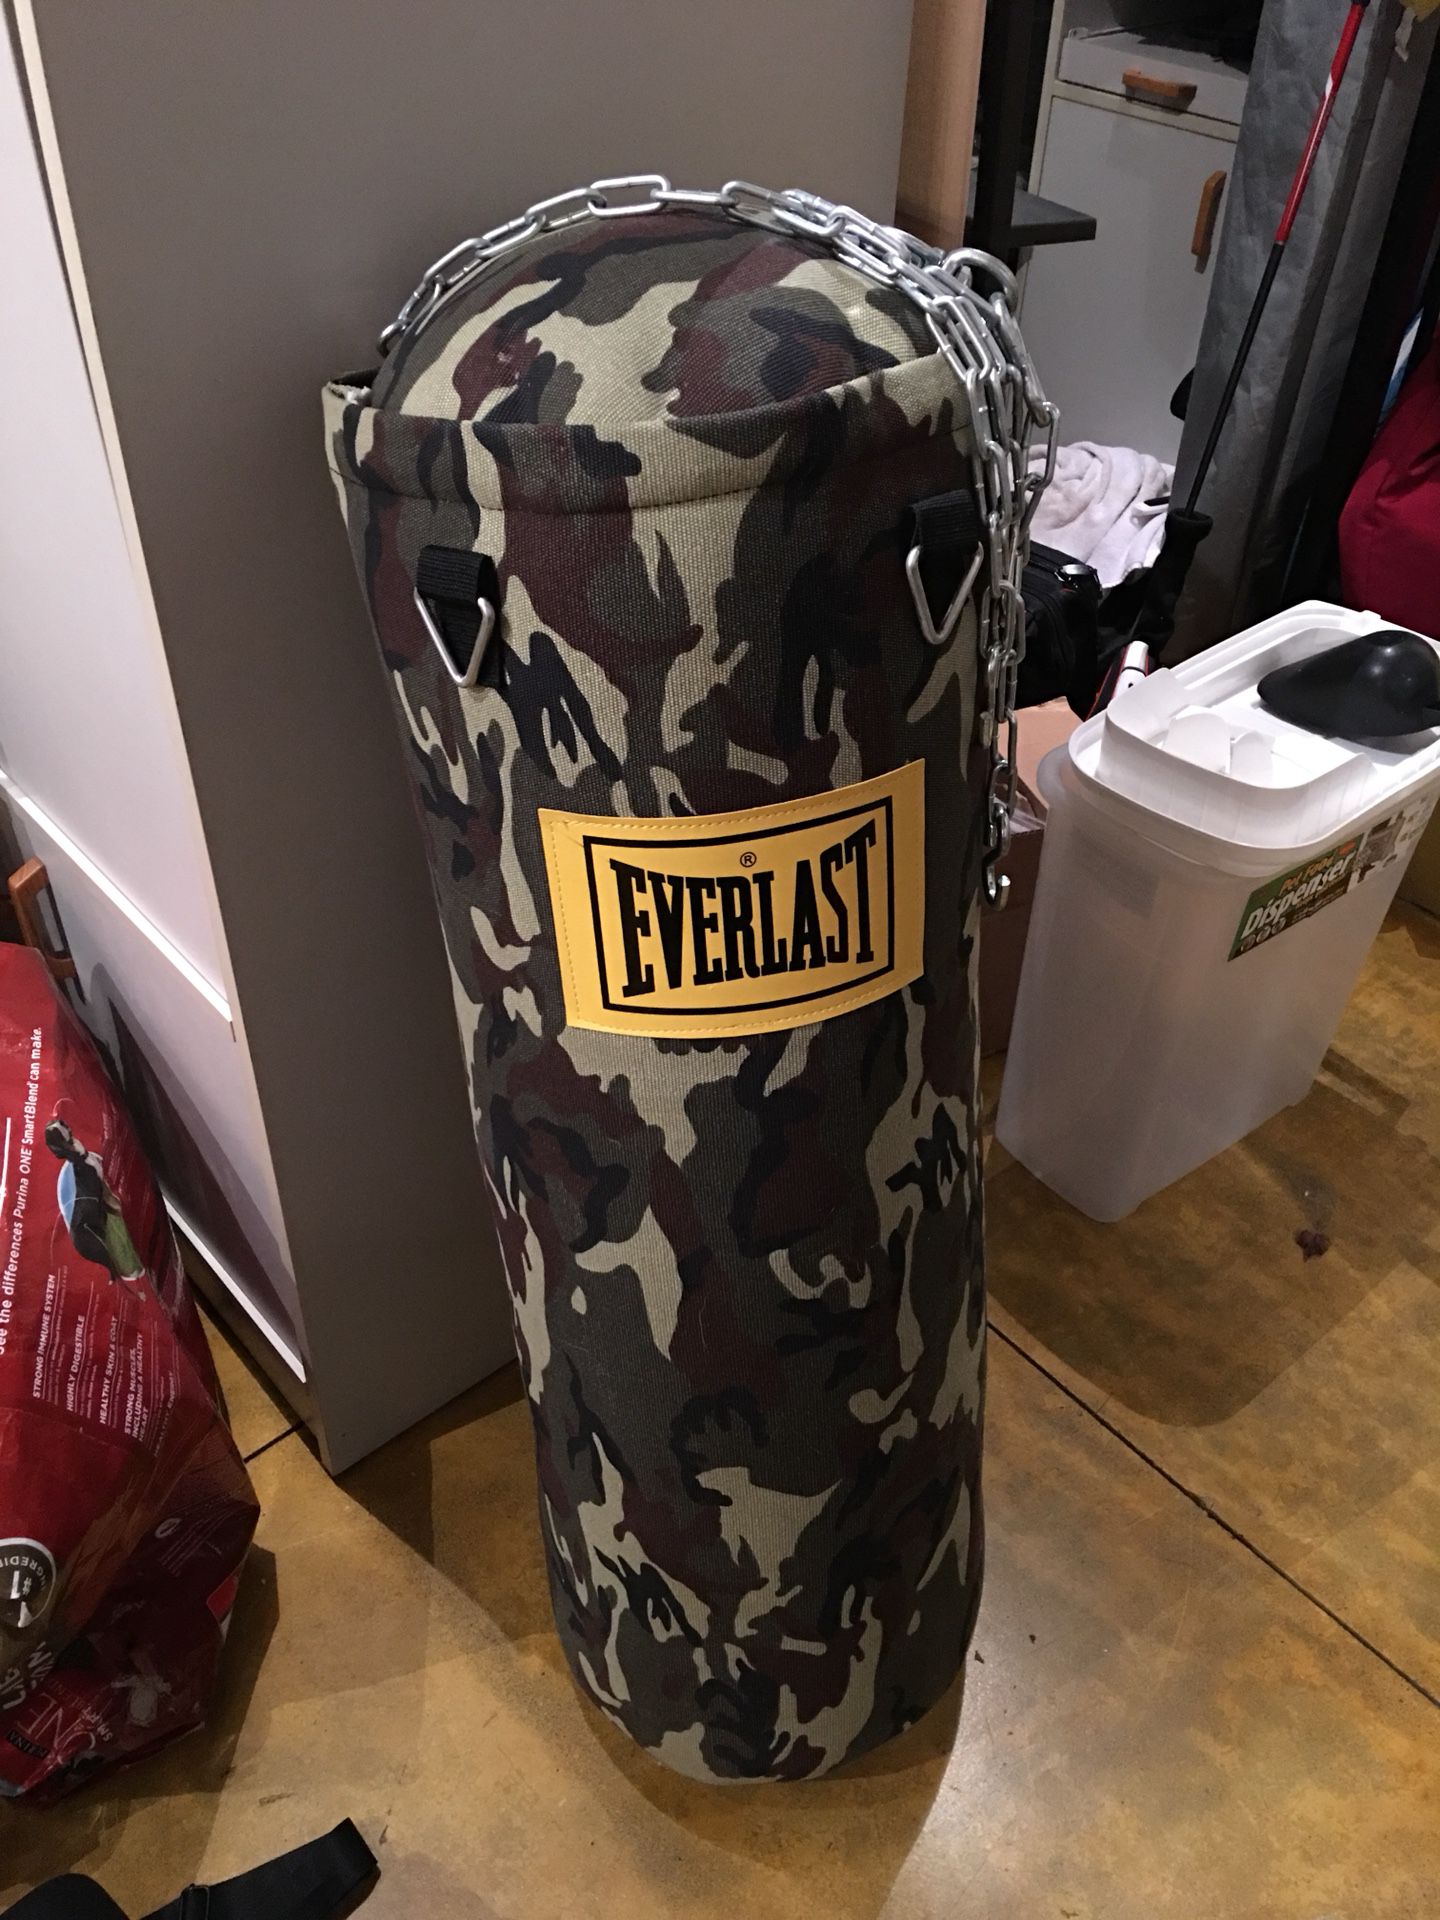 Everlast bag with TKO Bag Stand with speed bag plate.